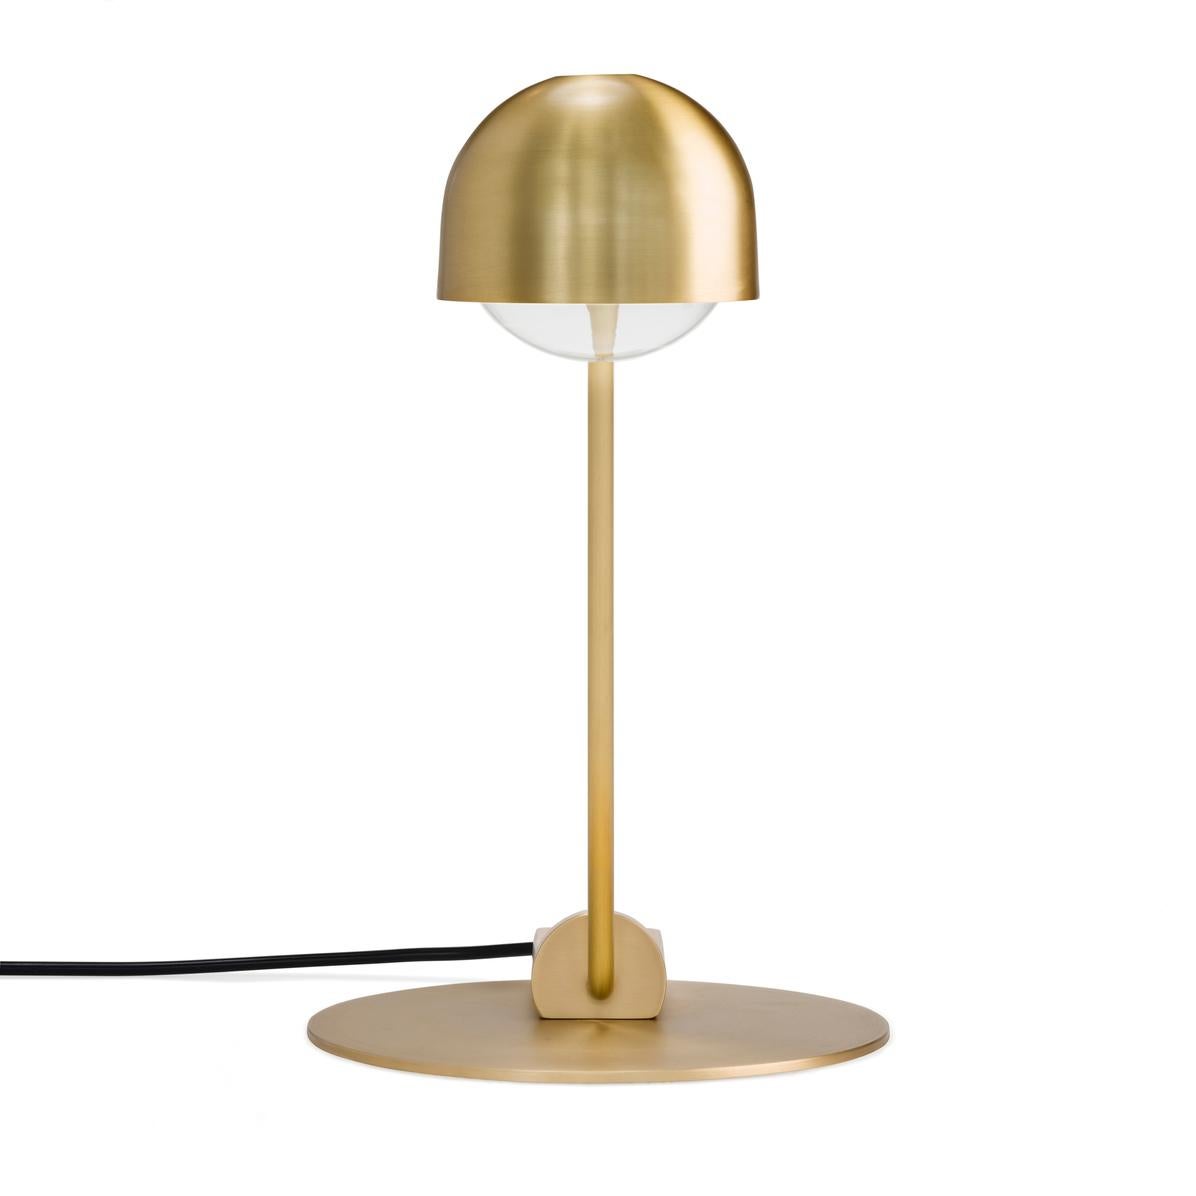 Table lamp designed by Joe Colombo in 1965. 

The Domo lamp was originally designed by Italian designer Joe Colombo in 1965. Back then he designed three lamps based on the same core shape. Known for his democratic and functional design, his